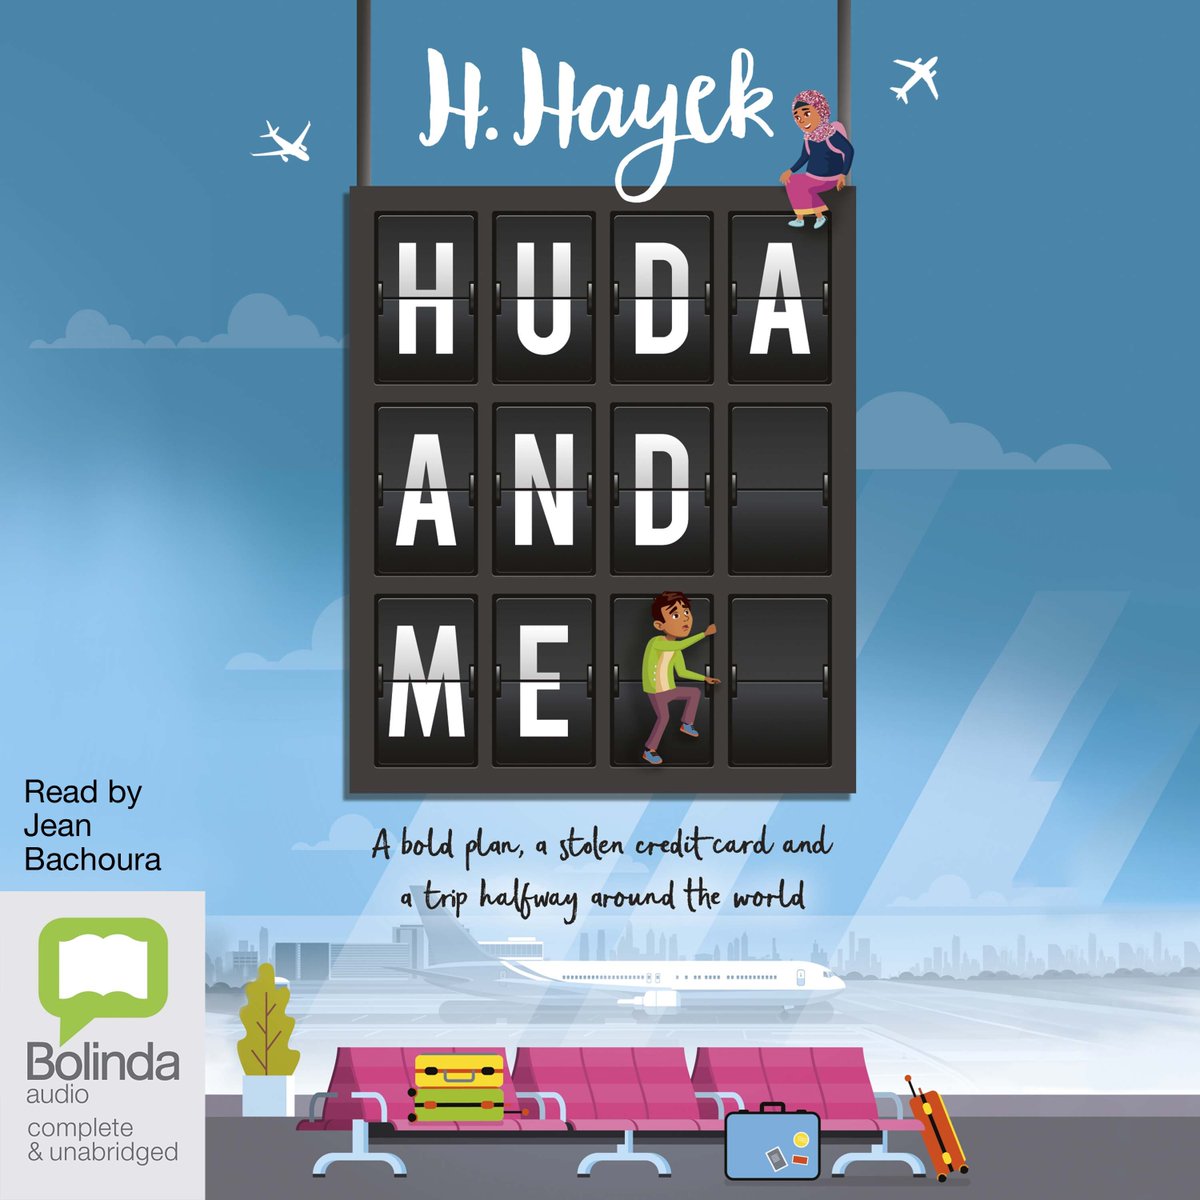 📚 IMAGINE A STORY ON AUDIOBOOK! 📚 Our JUNE featured Audiobook is 'Huda and Me' by H. Hayek and suitable for readers aged 10+. Find out how you can listen here ➡️childrenslaureate.org.au/audio-books @AllenAndUnwin @HudaHayek @Bolindaaudio @BorrowBox @GabrielleWang #audiobooks